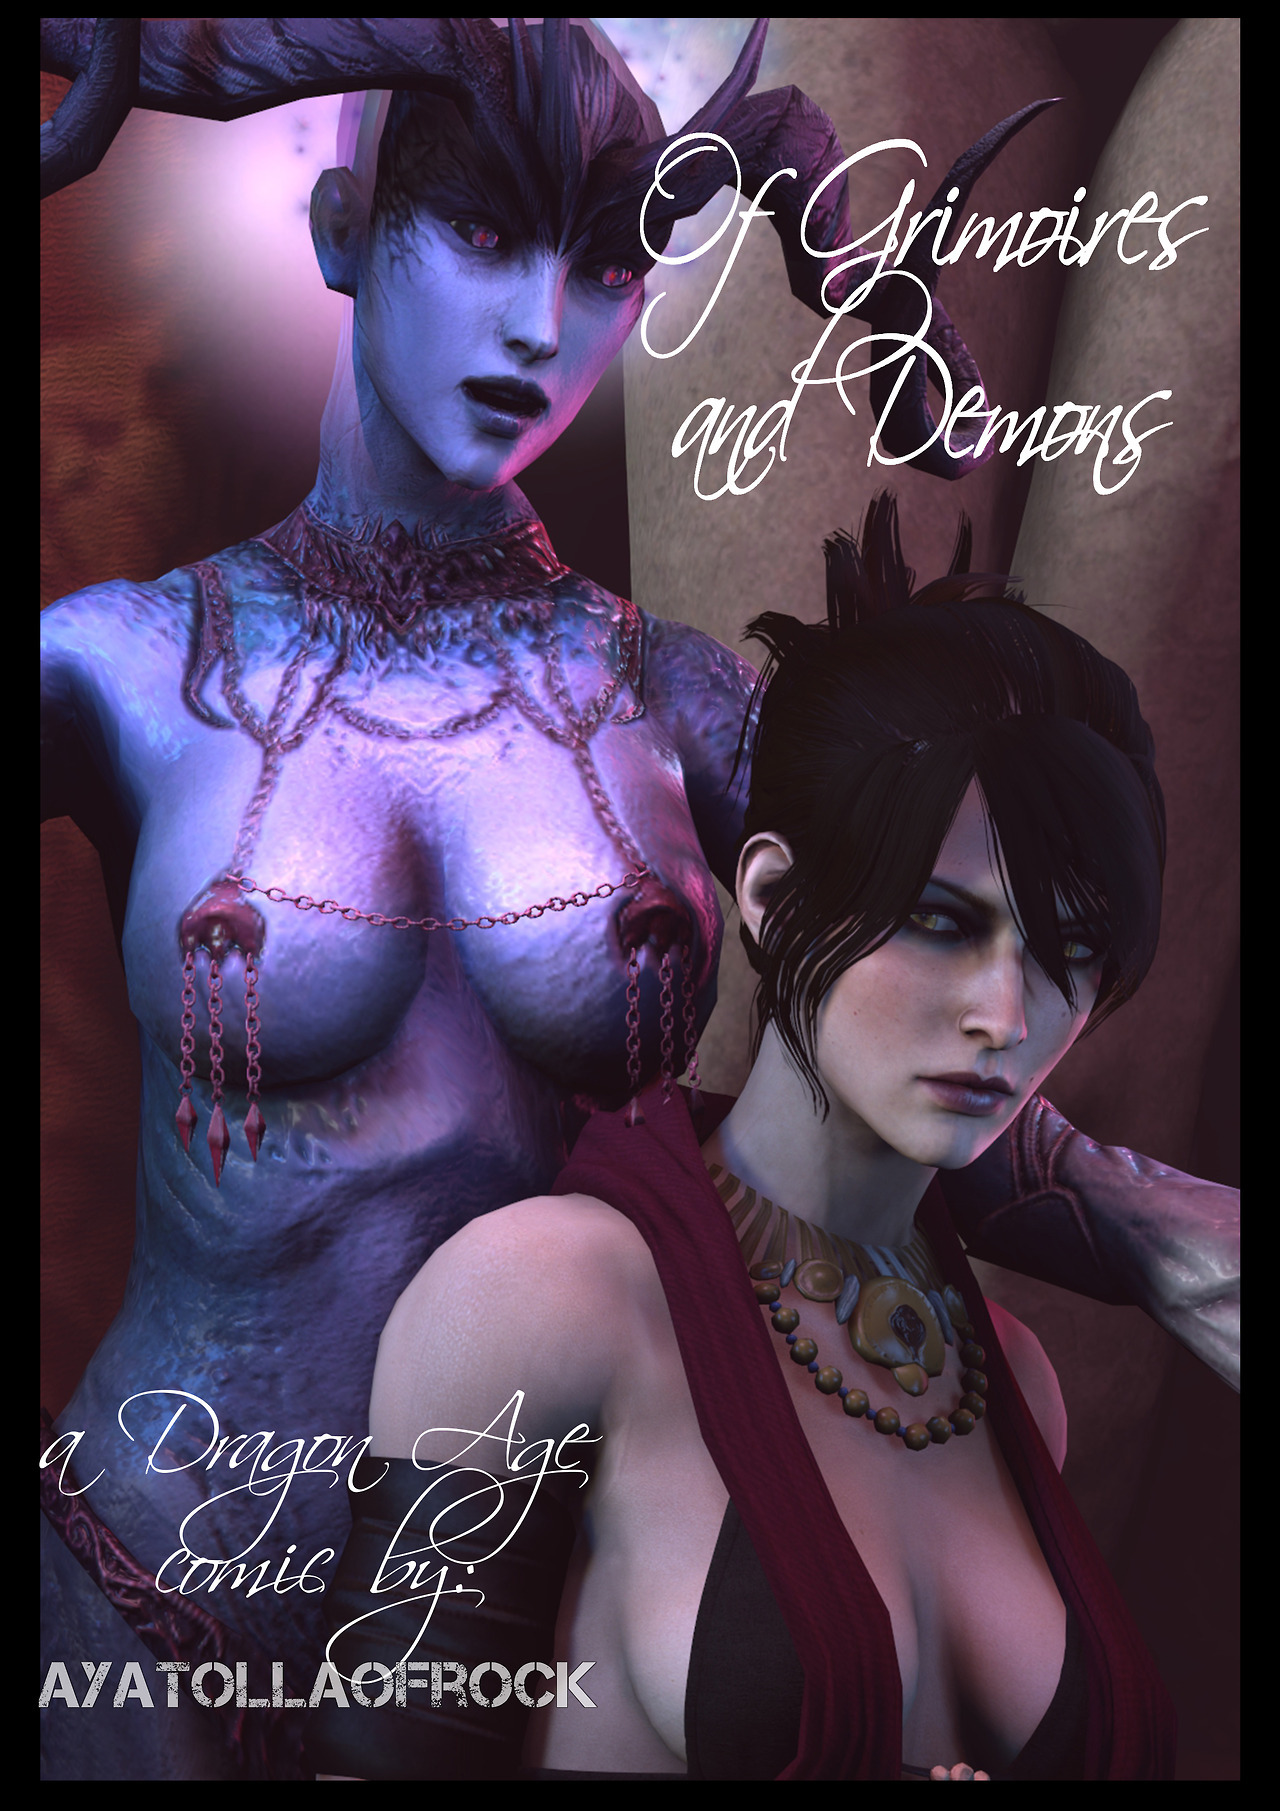 AyatollaOfRock - Of Grimoires and Demons - Dragon Age 3d sex comic